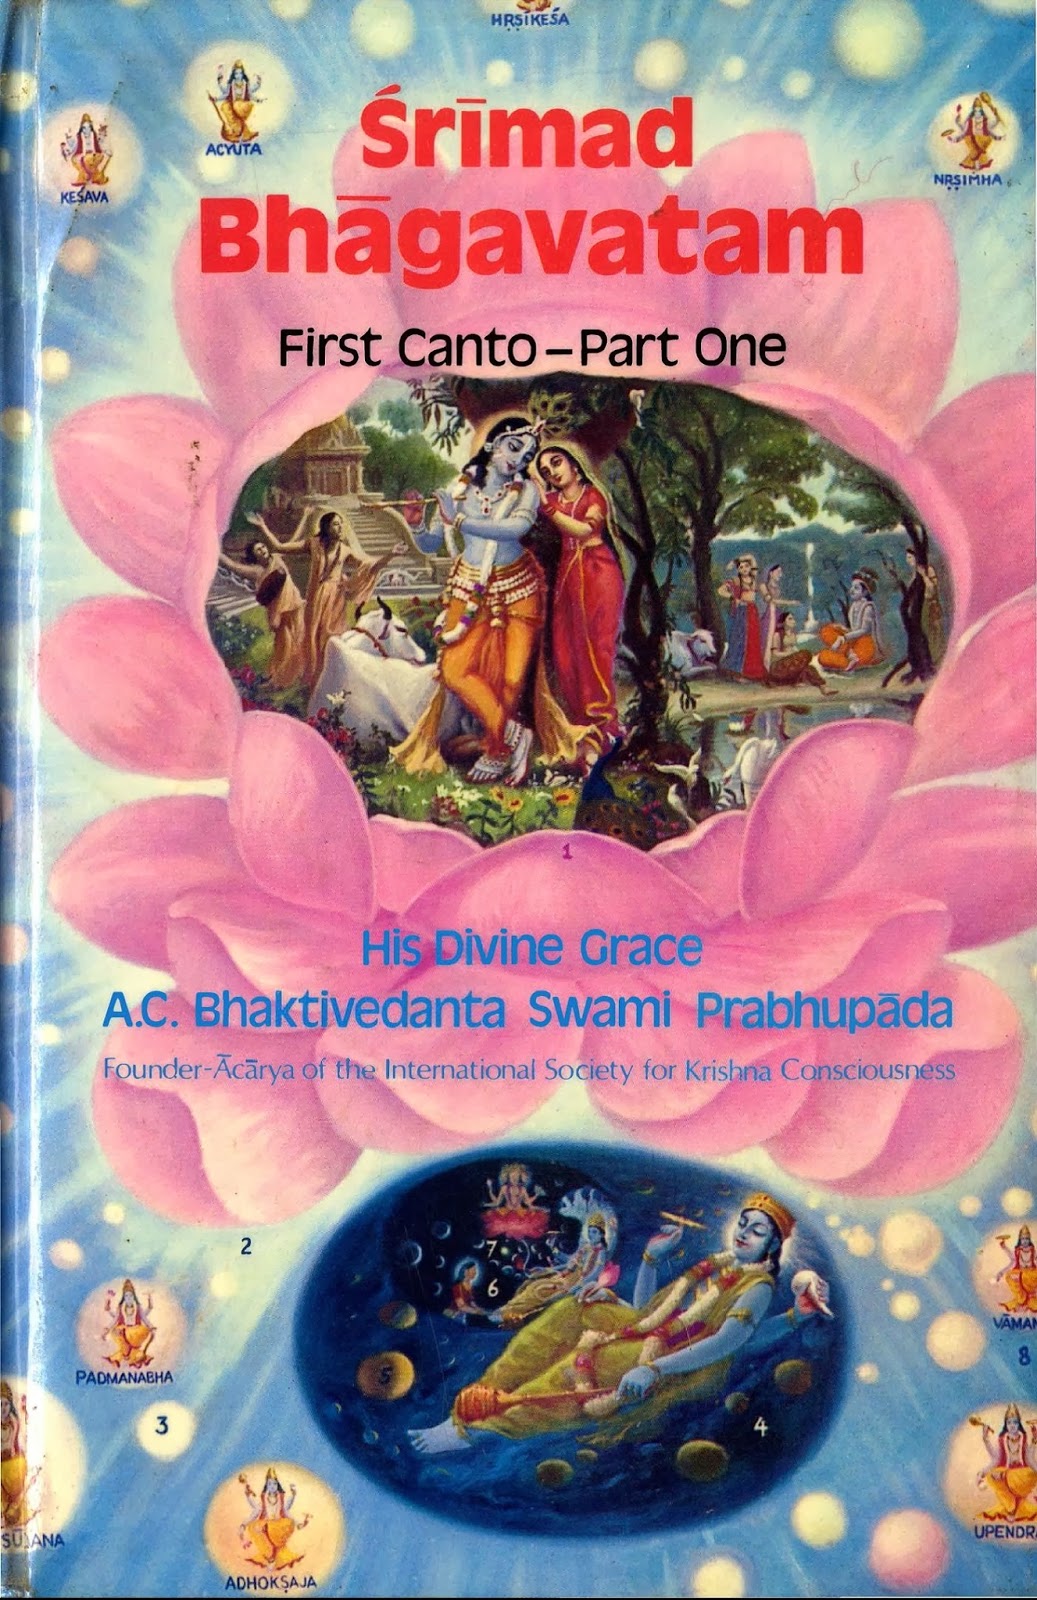 ART OF KRISHNA - Simply by chanting the holy name of Krishna one can  obtain freedom from material existence. Indeed, simply by chanting the Hare  Krishna mantra one will be able to